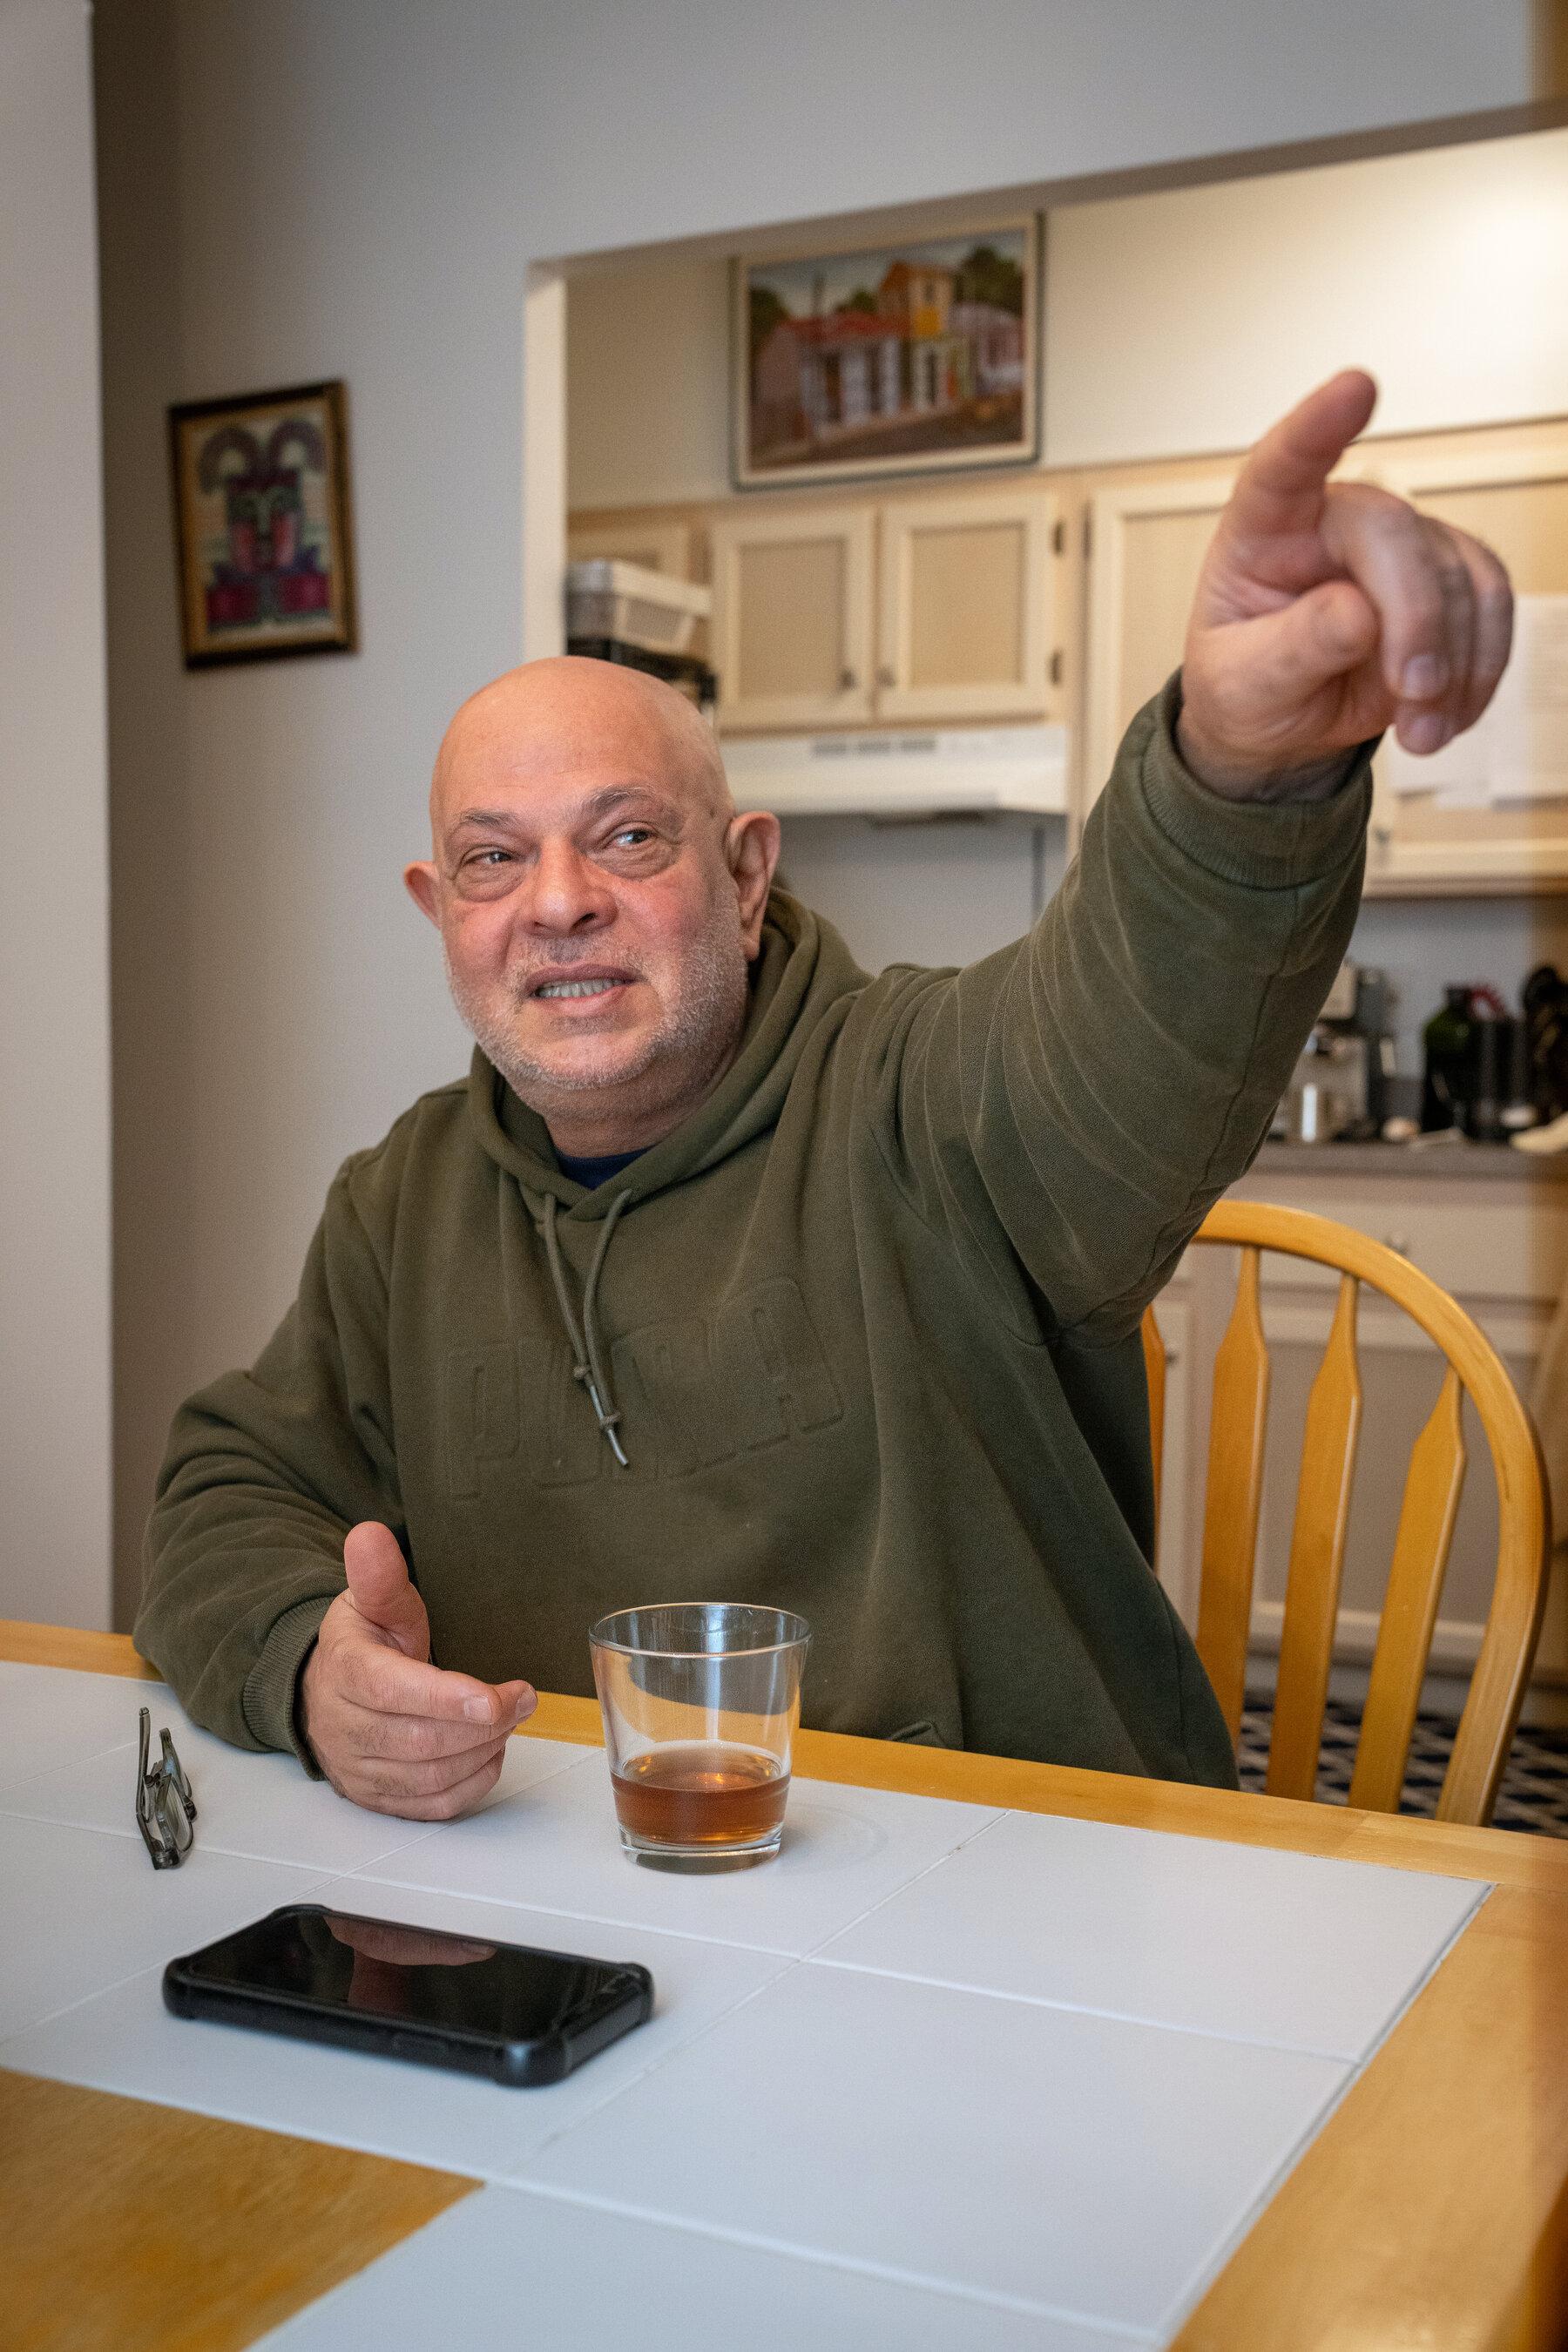 A man in an olive green sweatshirt sits at a kitchen table and points.